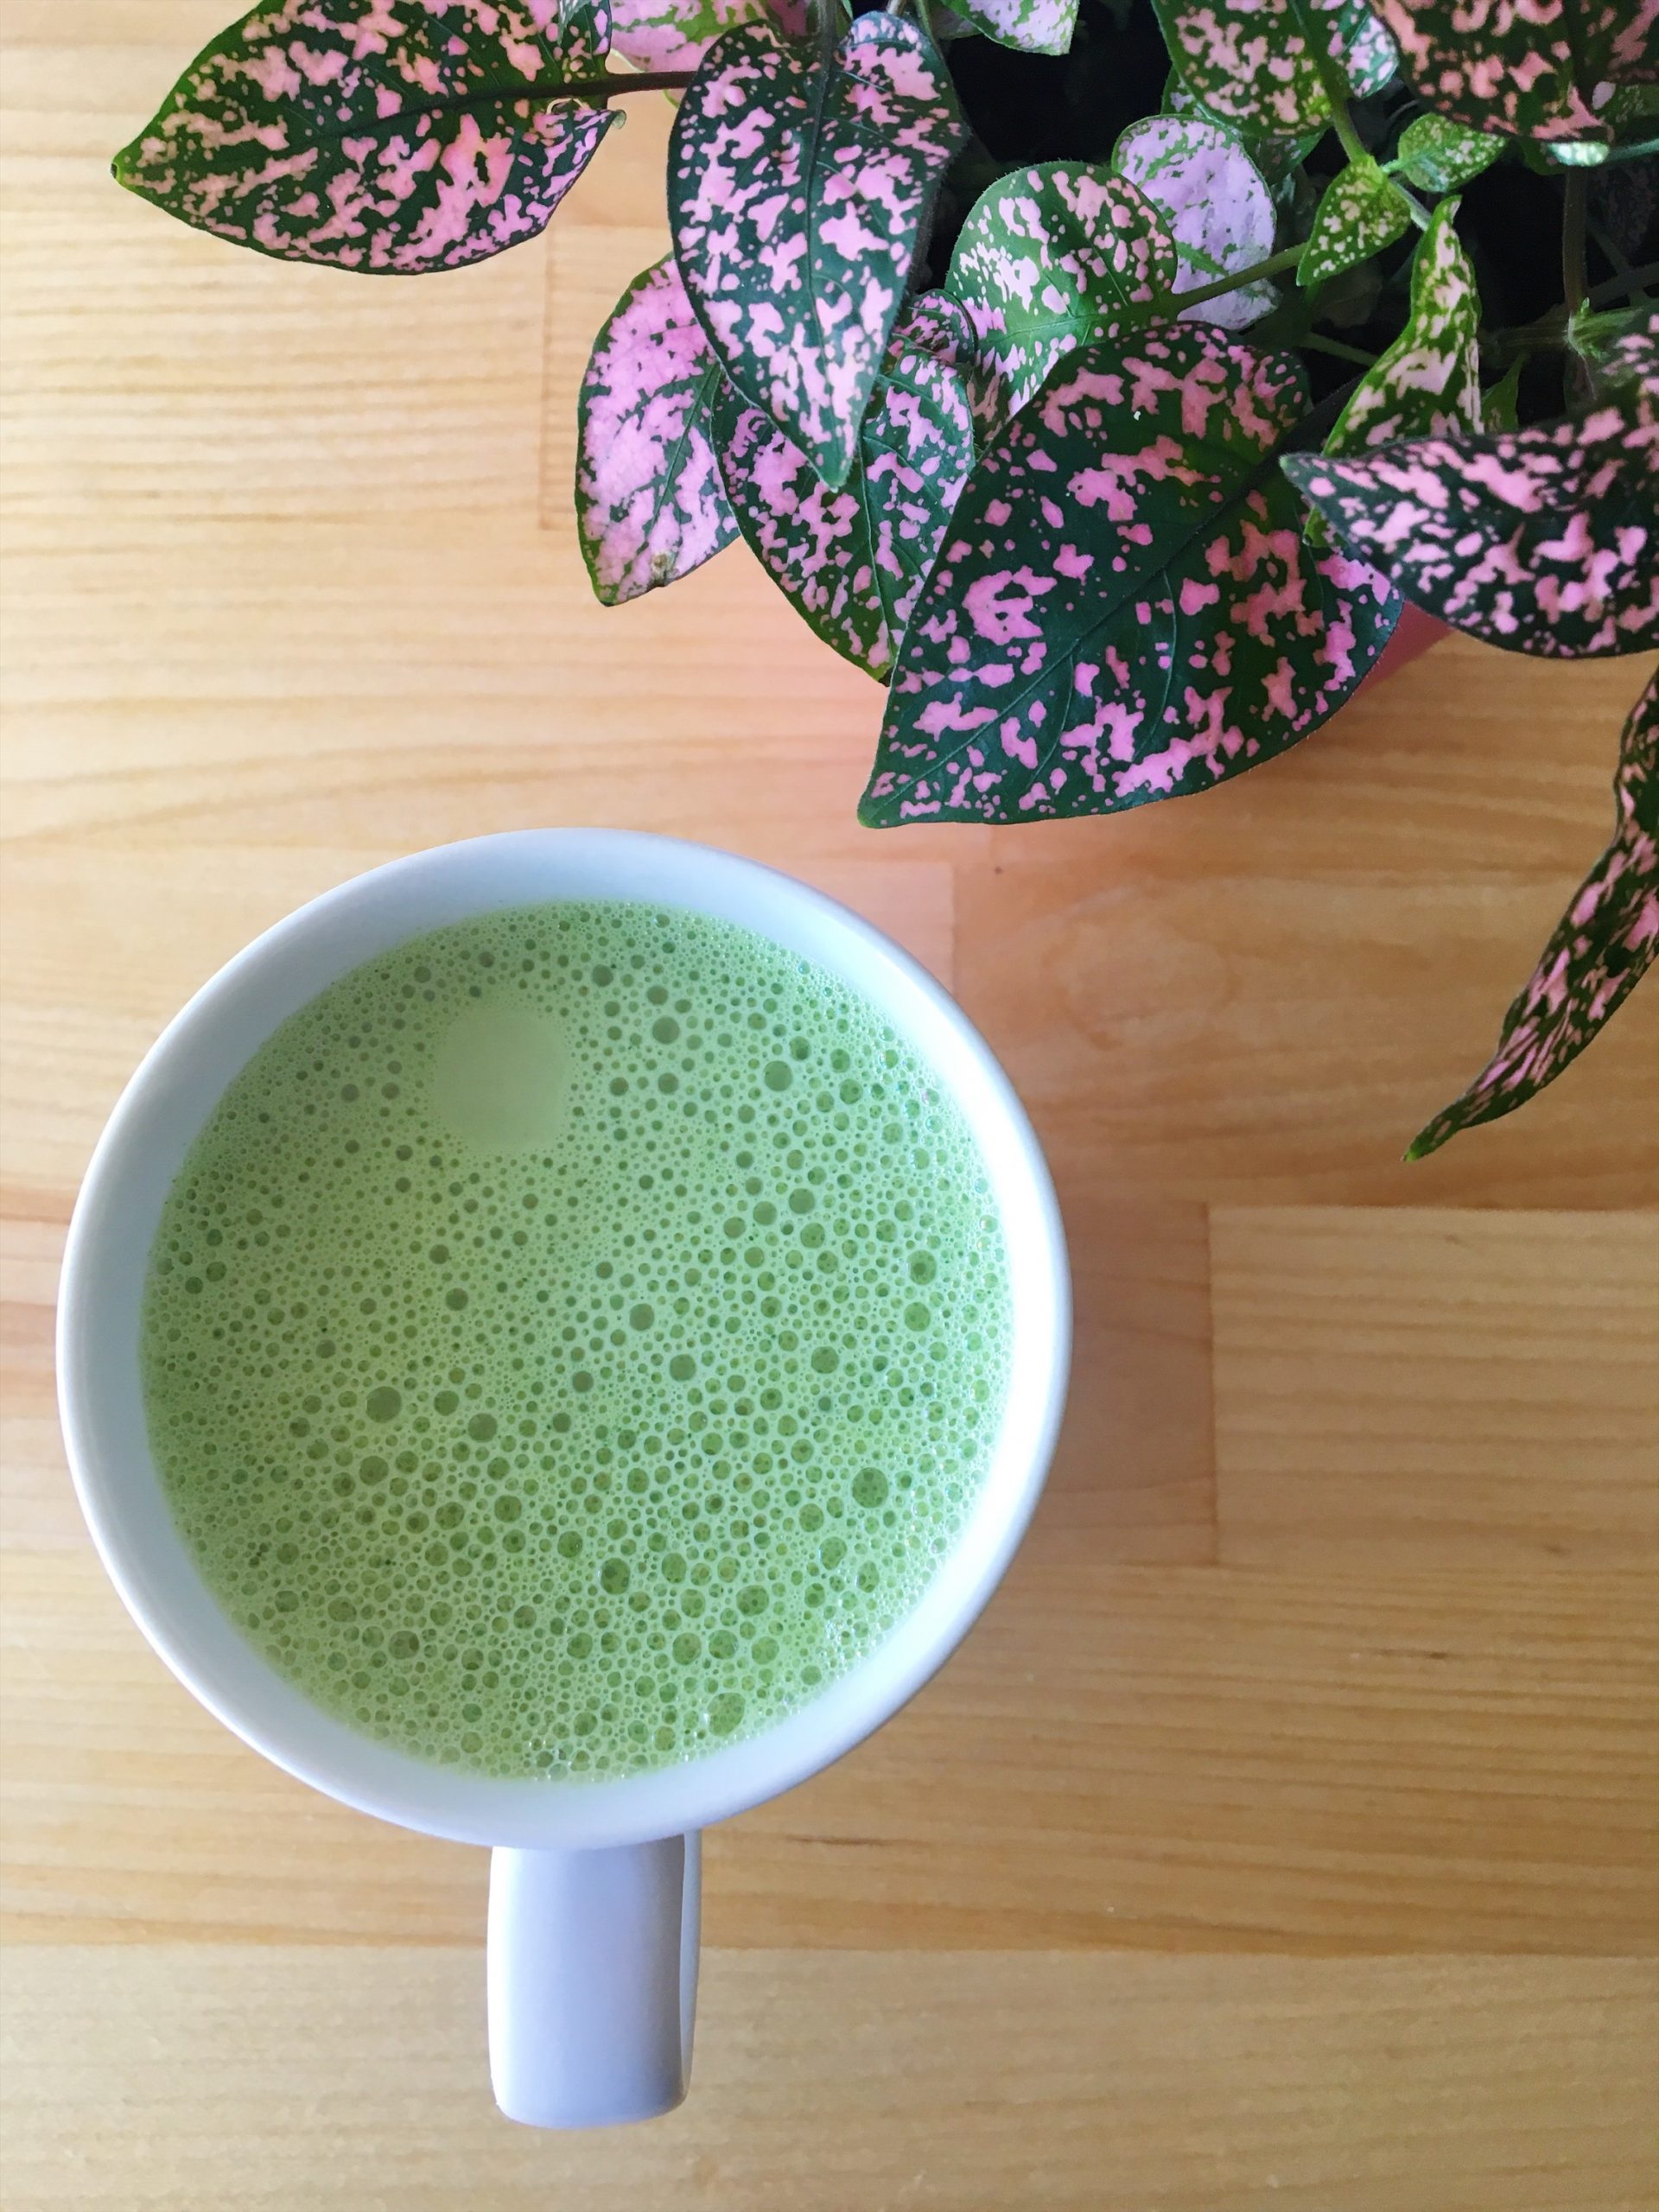 HOW TO BREW THE PERFECT CUP OF MATCHA